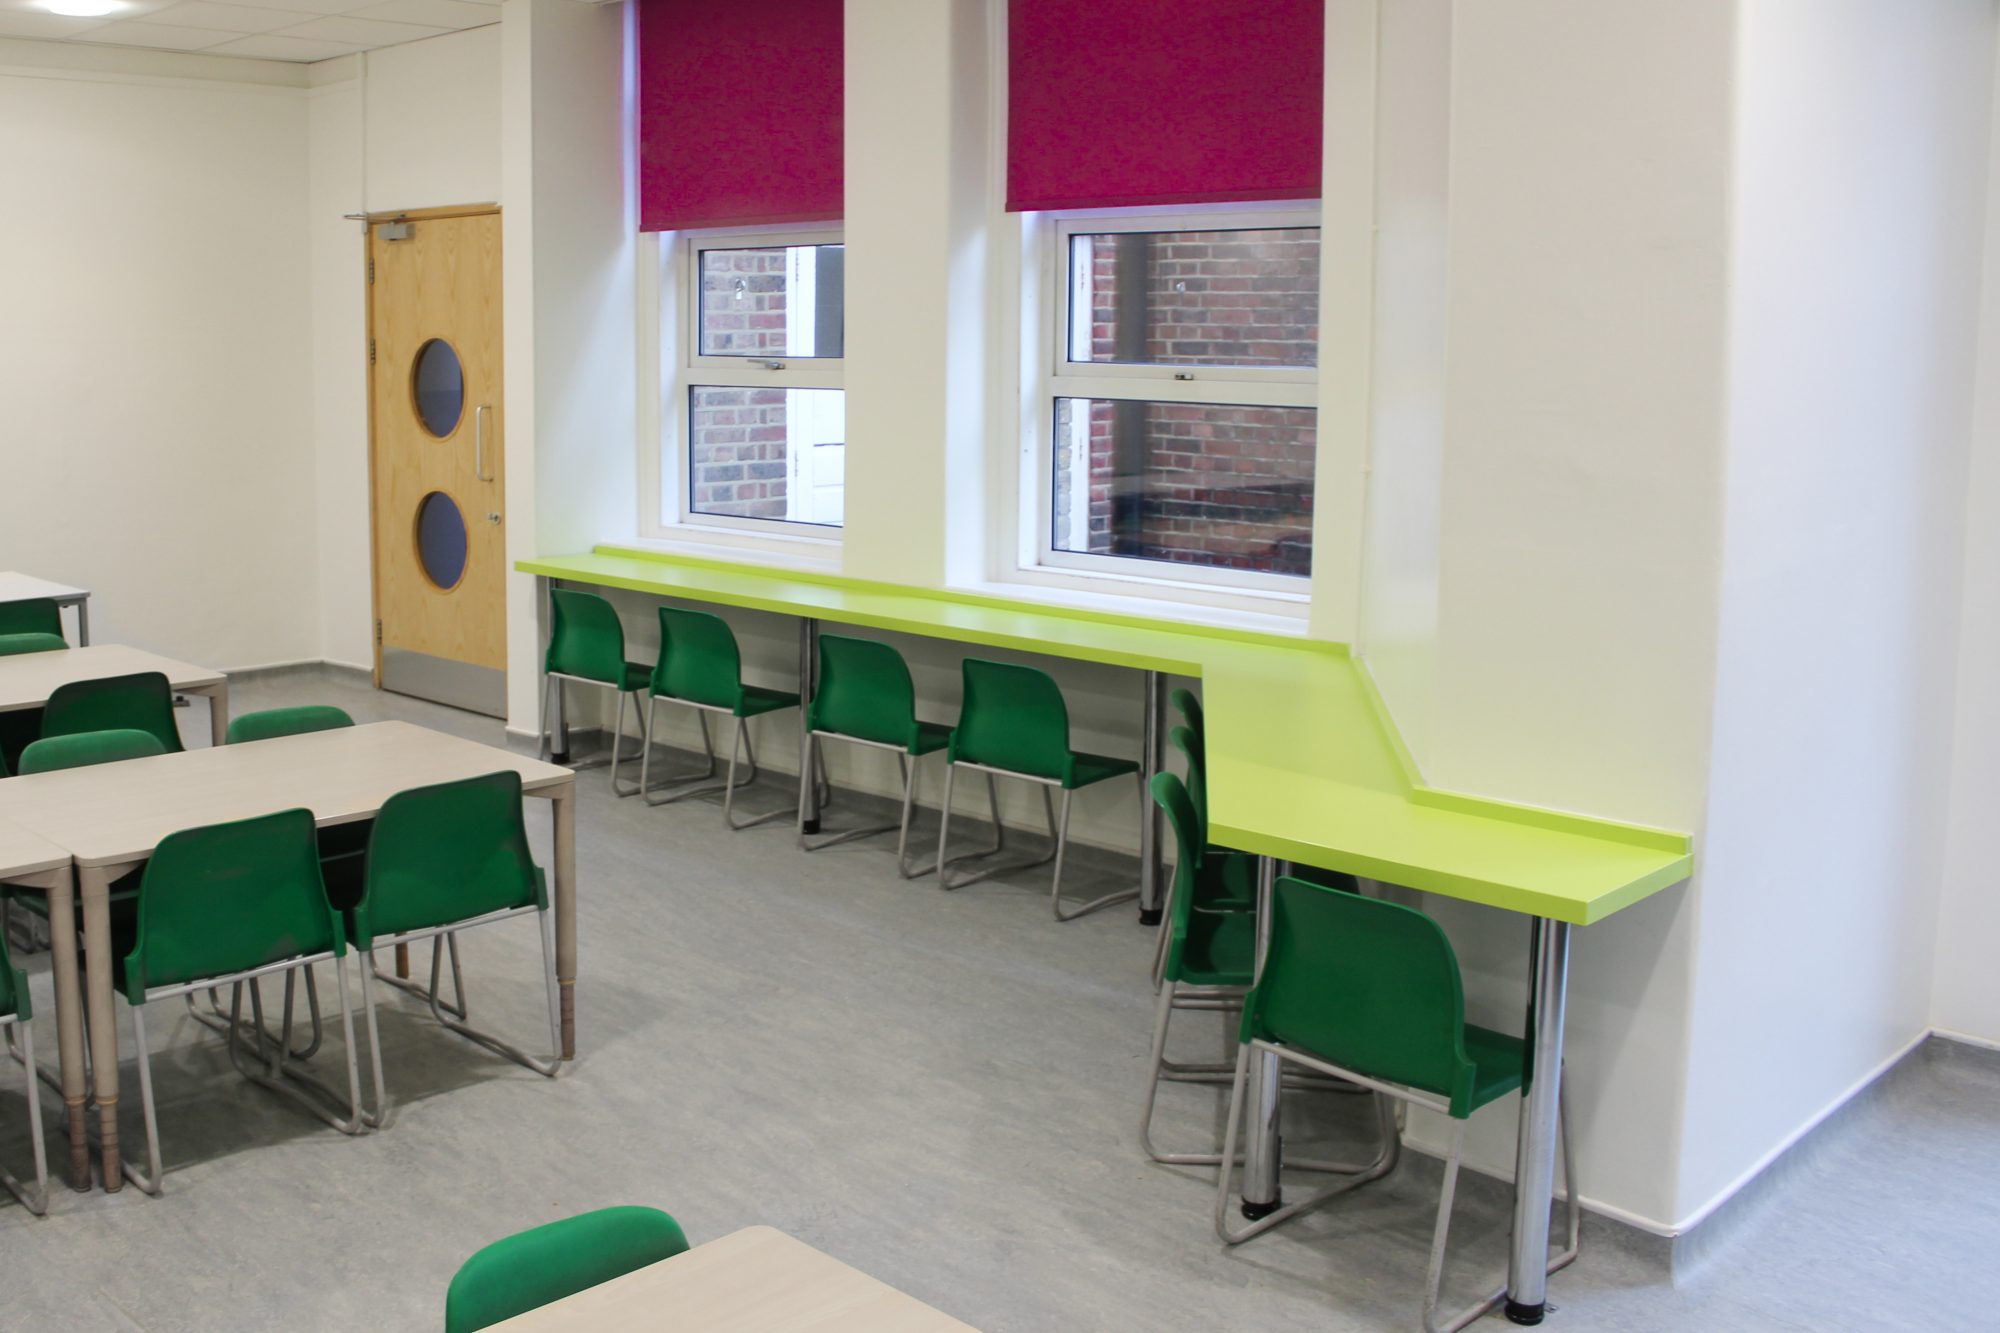 Designing For Pupils With Disabilities And SEN